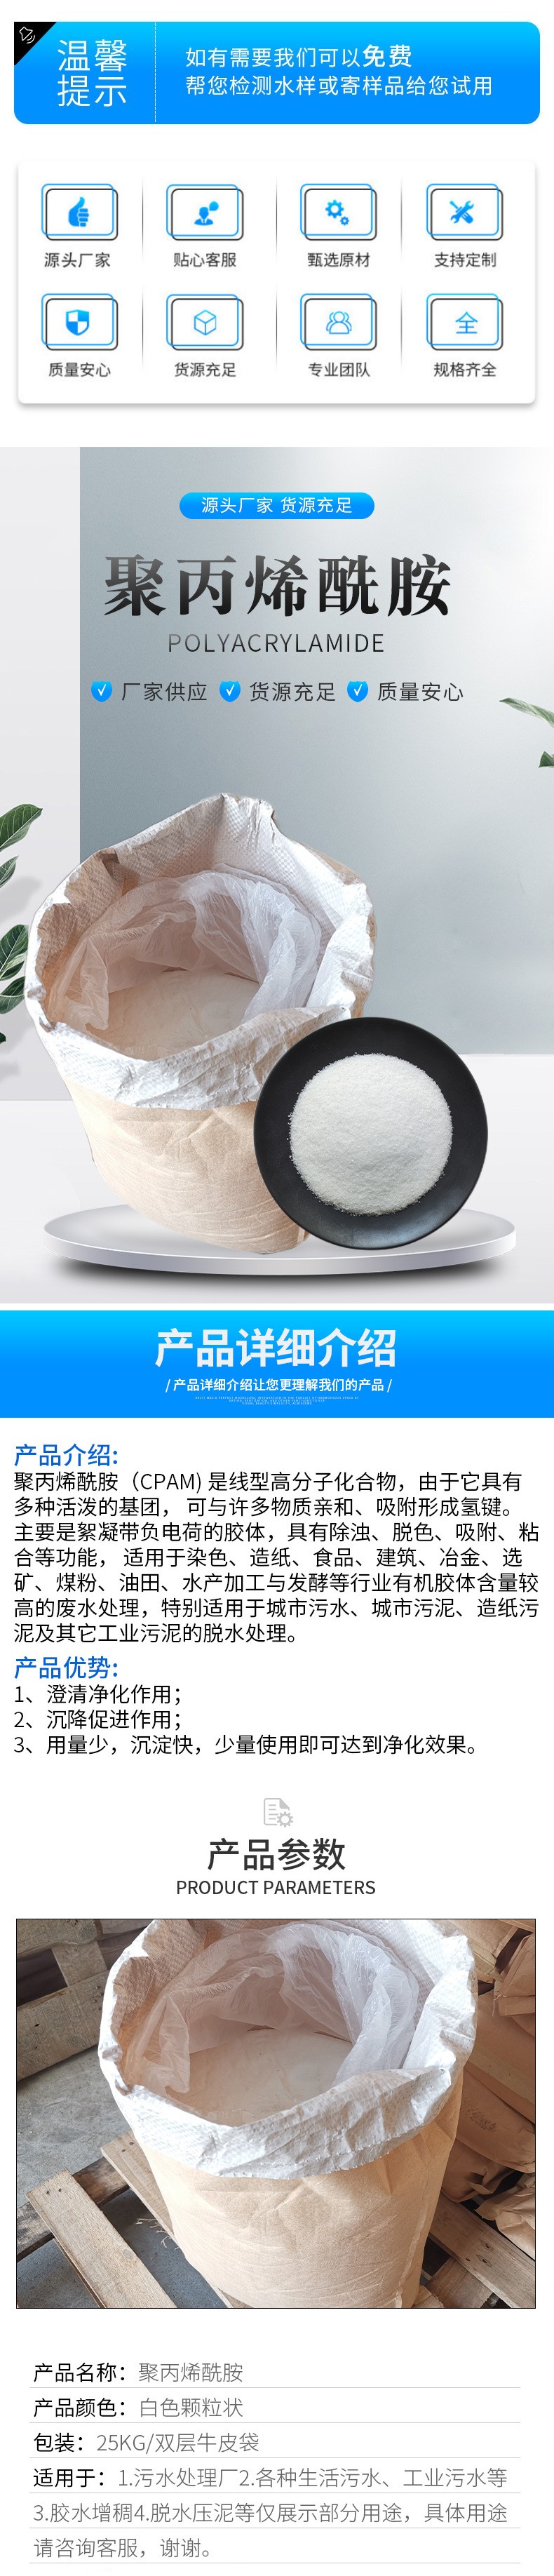 Powdered polyacrylamide has fast dissolution rate, short stirring time, strong adaptability, and is sold directly by PAM strength factories